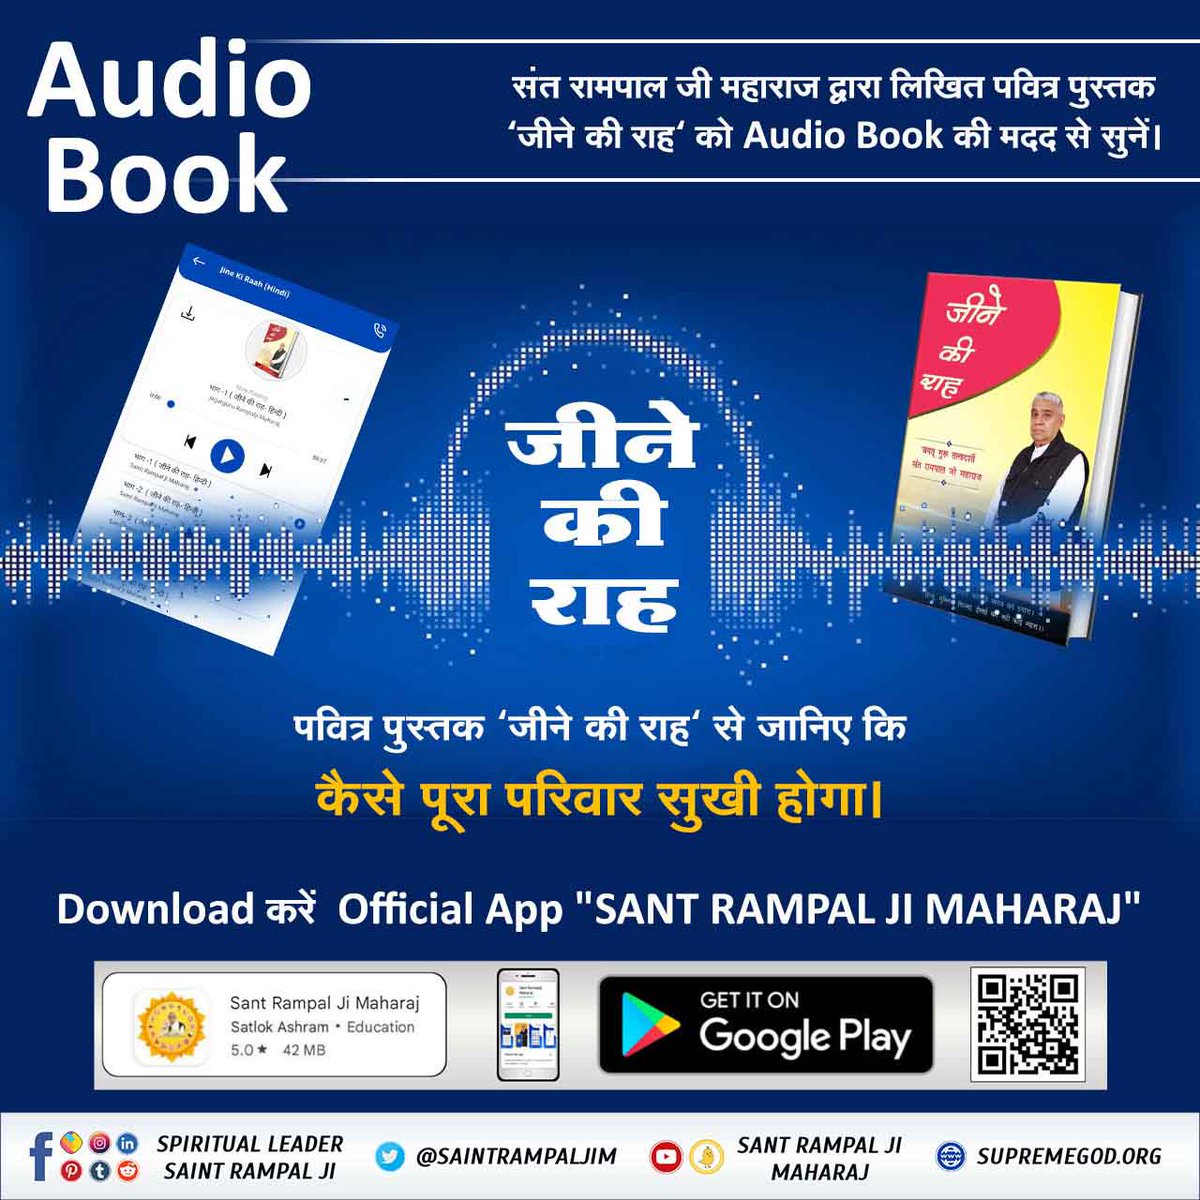 #AudioBook_JeeneKiRah Know from the holy book 'Jeene Ki Raah' how the whole family can be happy. Download Official App 'SANT RAMPAL JI MAHARAJ' to Listen to the Audiobook #GodMorningSunday